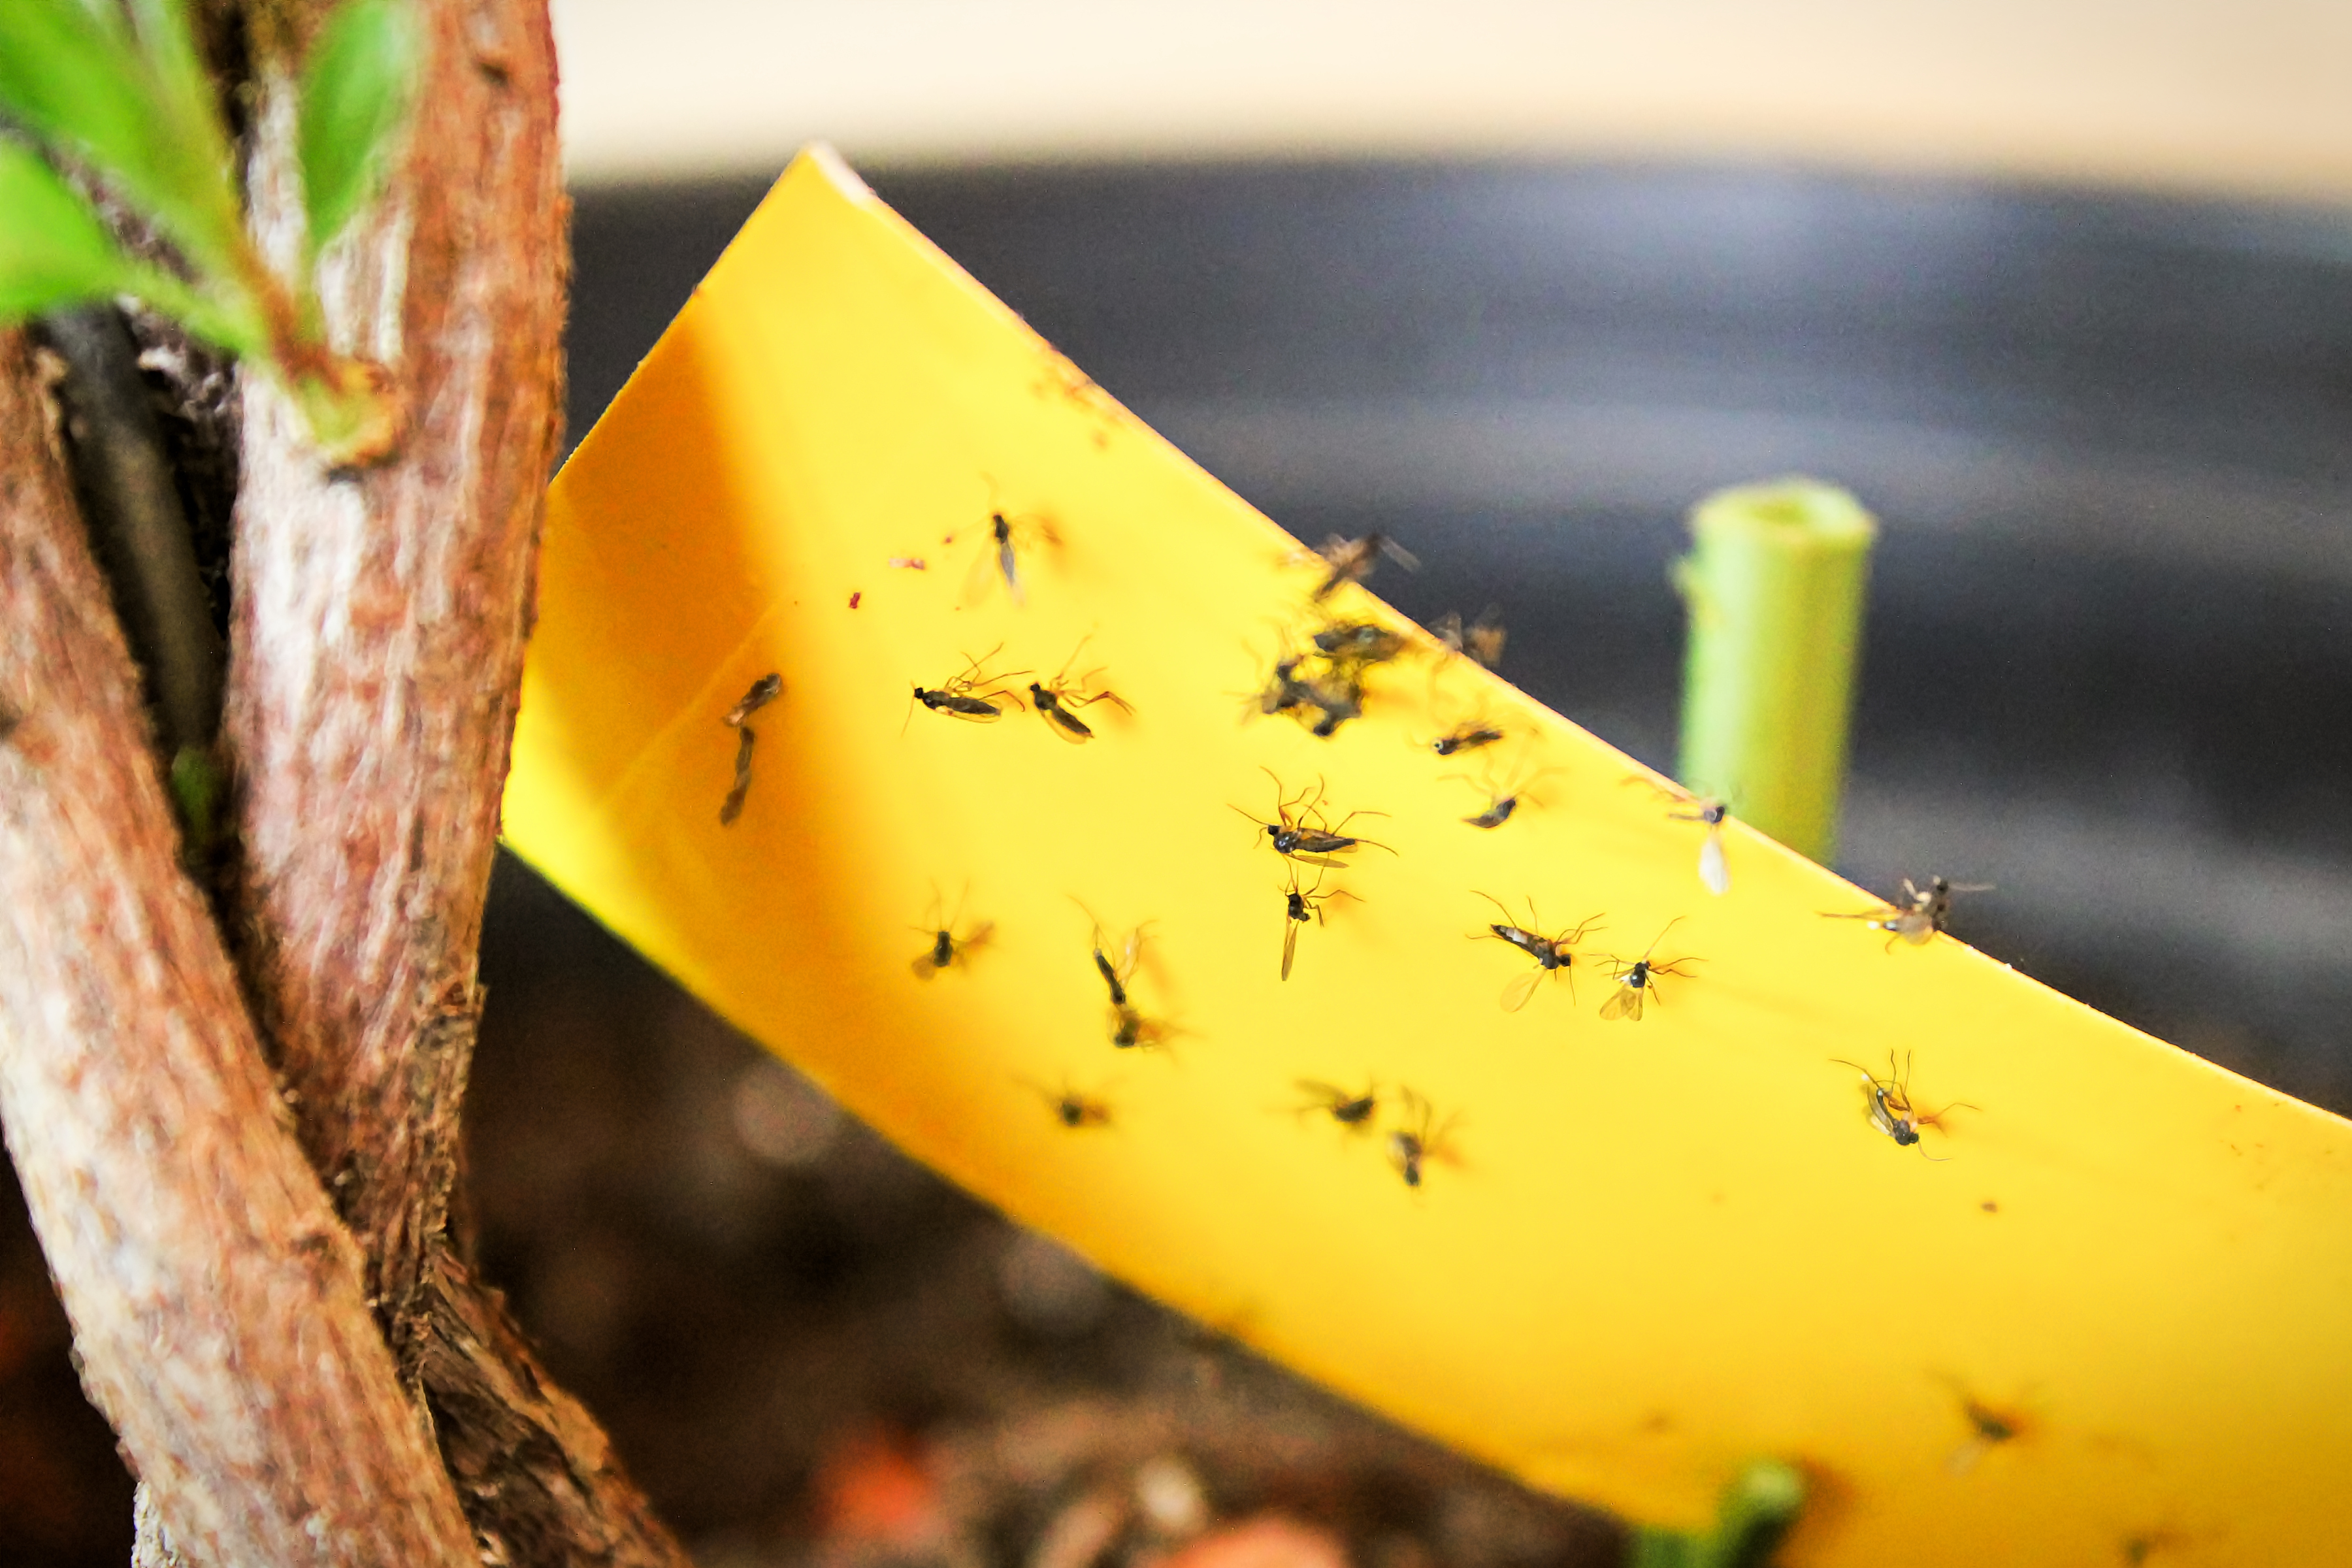 How to make simple INSECT TRAP for your garden 